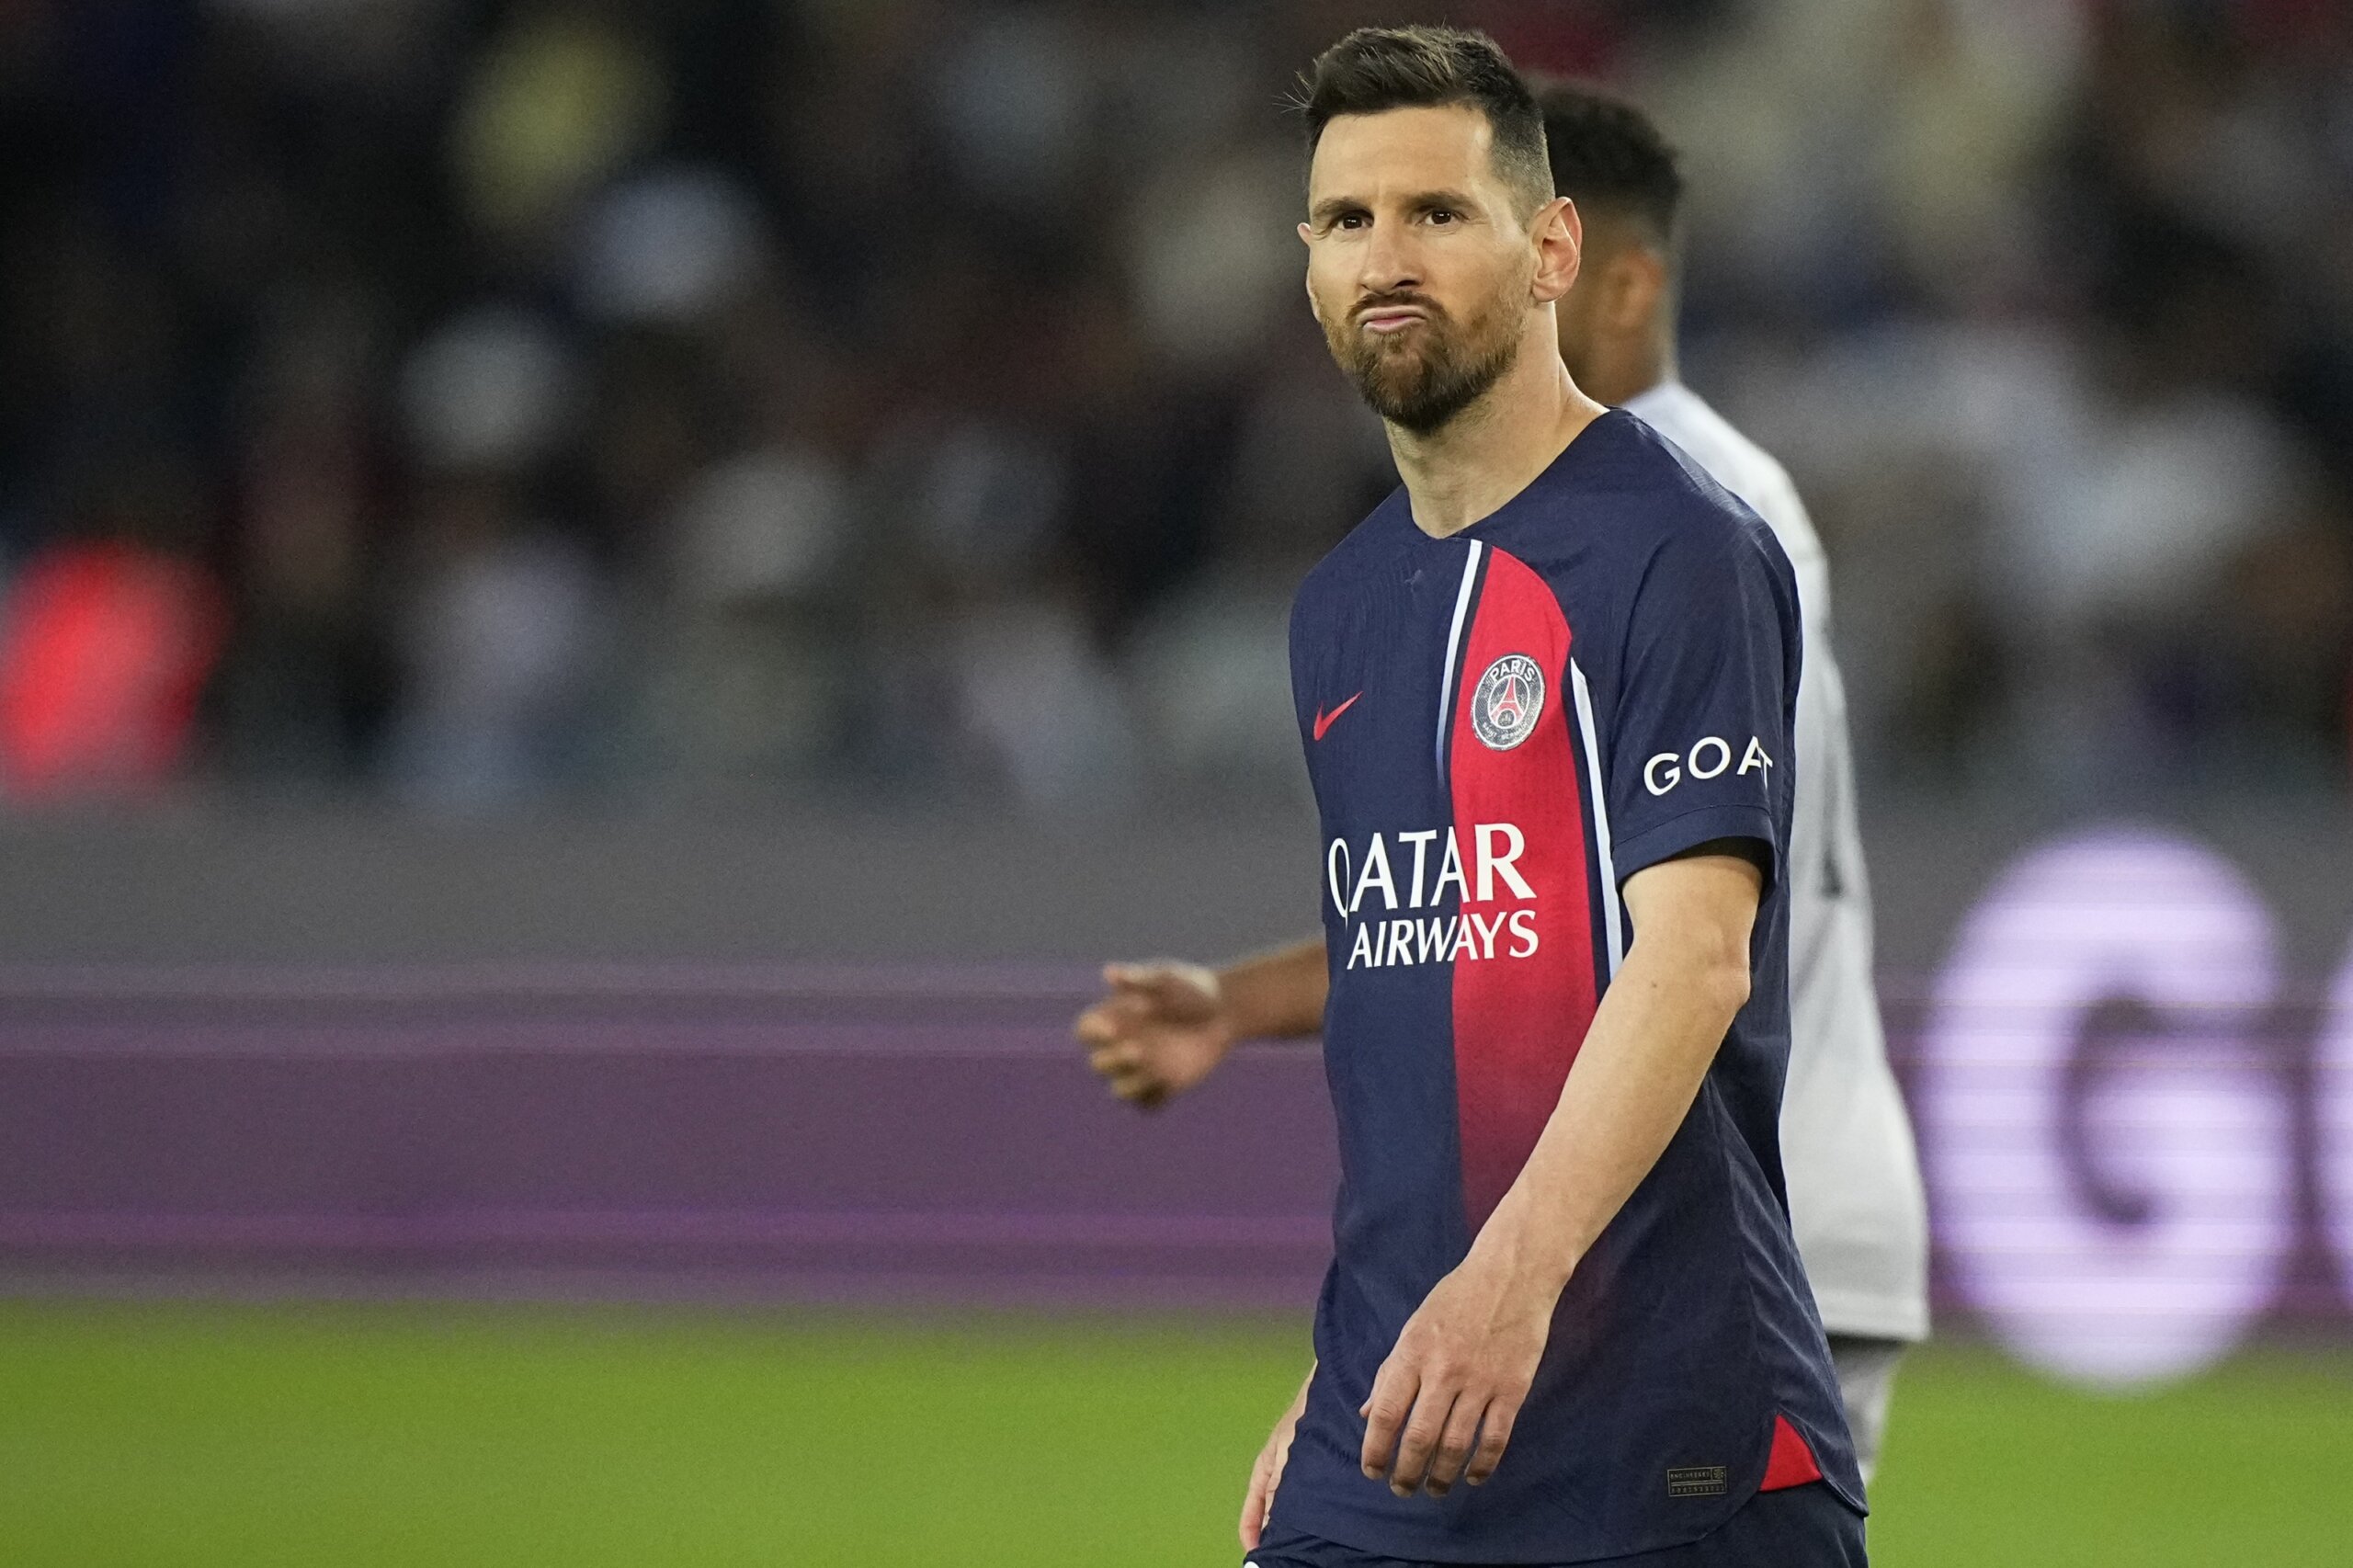 Lionel Messi News, Messi Jersey Number Lionel Messis Jersey Number at PSG  Revealed, it Not Barcelonas No 10: Report, Messi to PSG